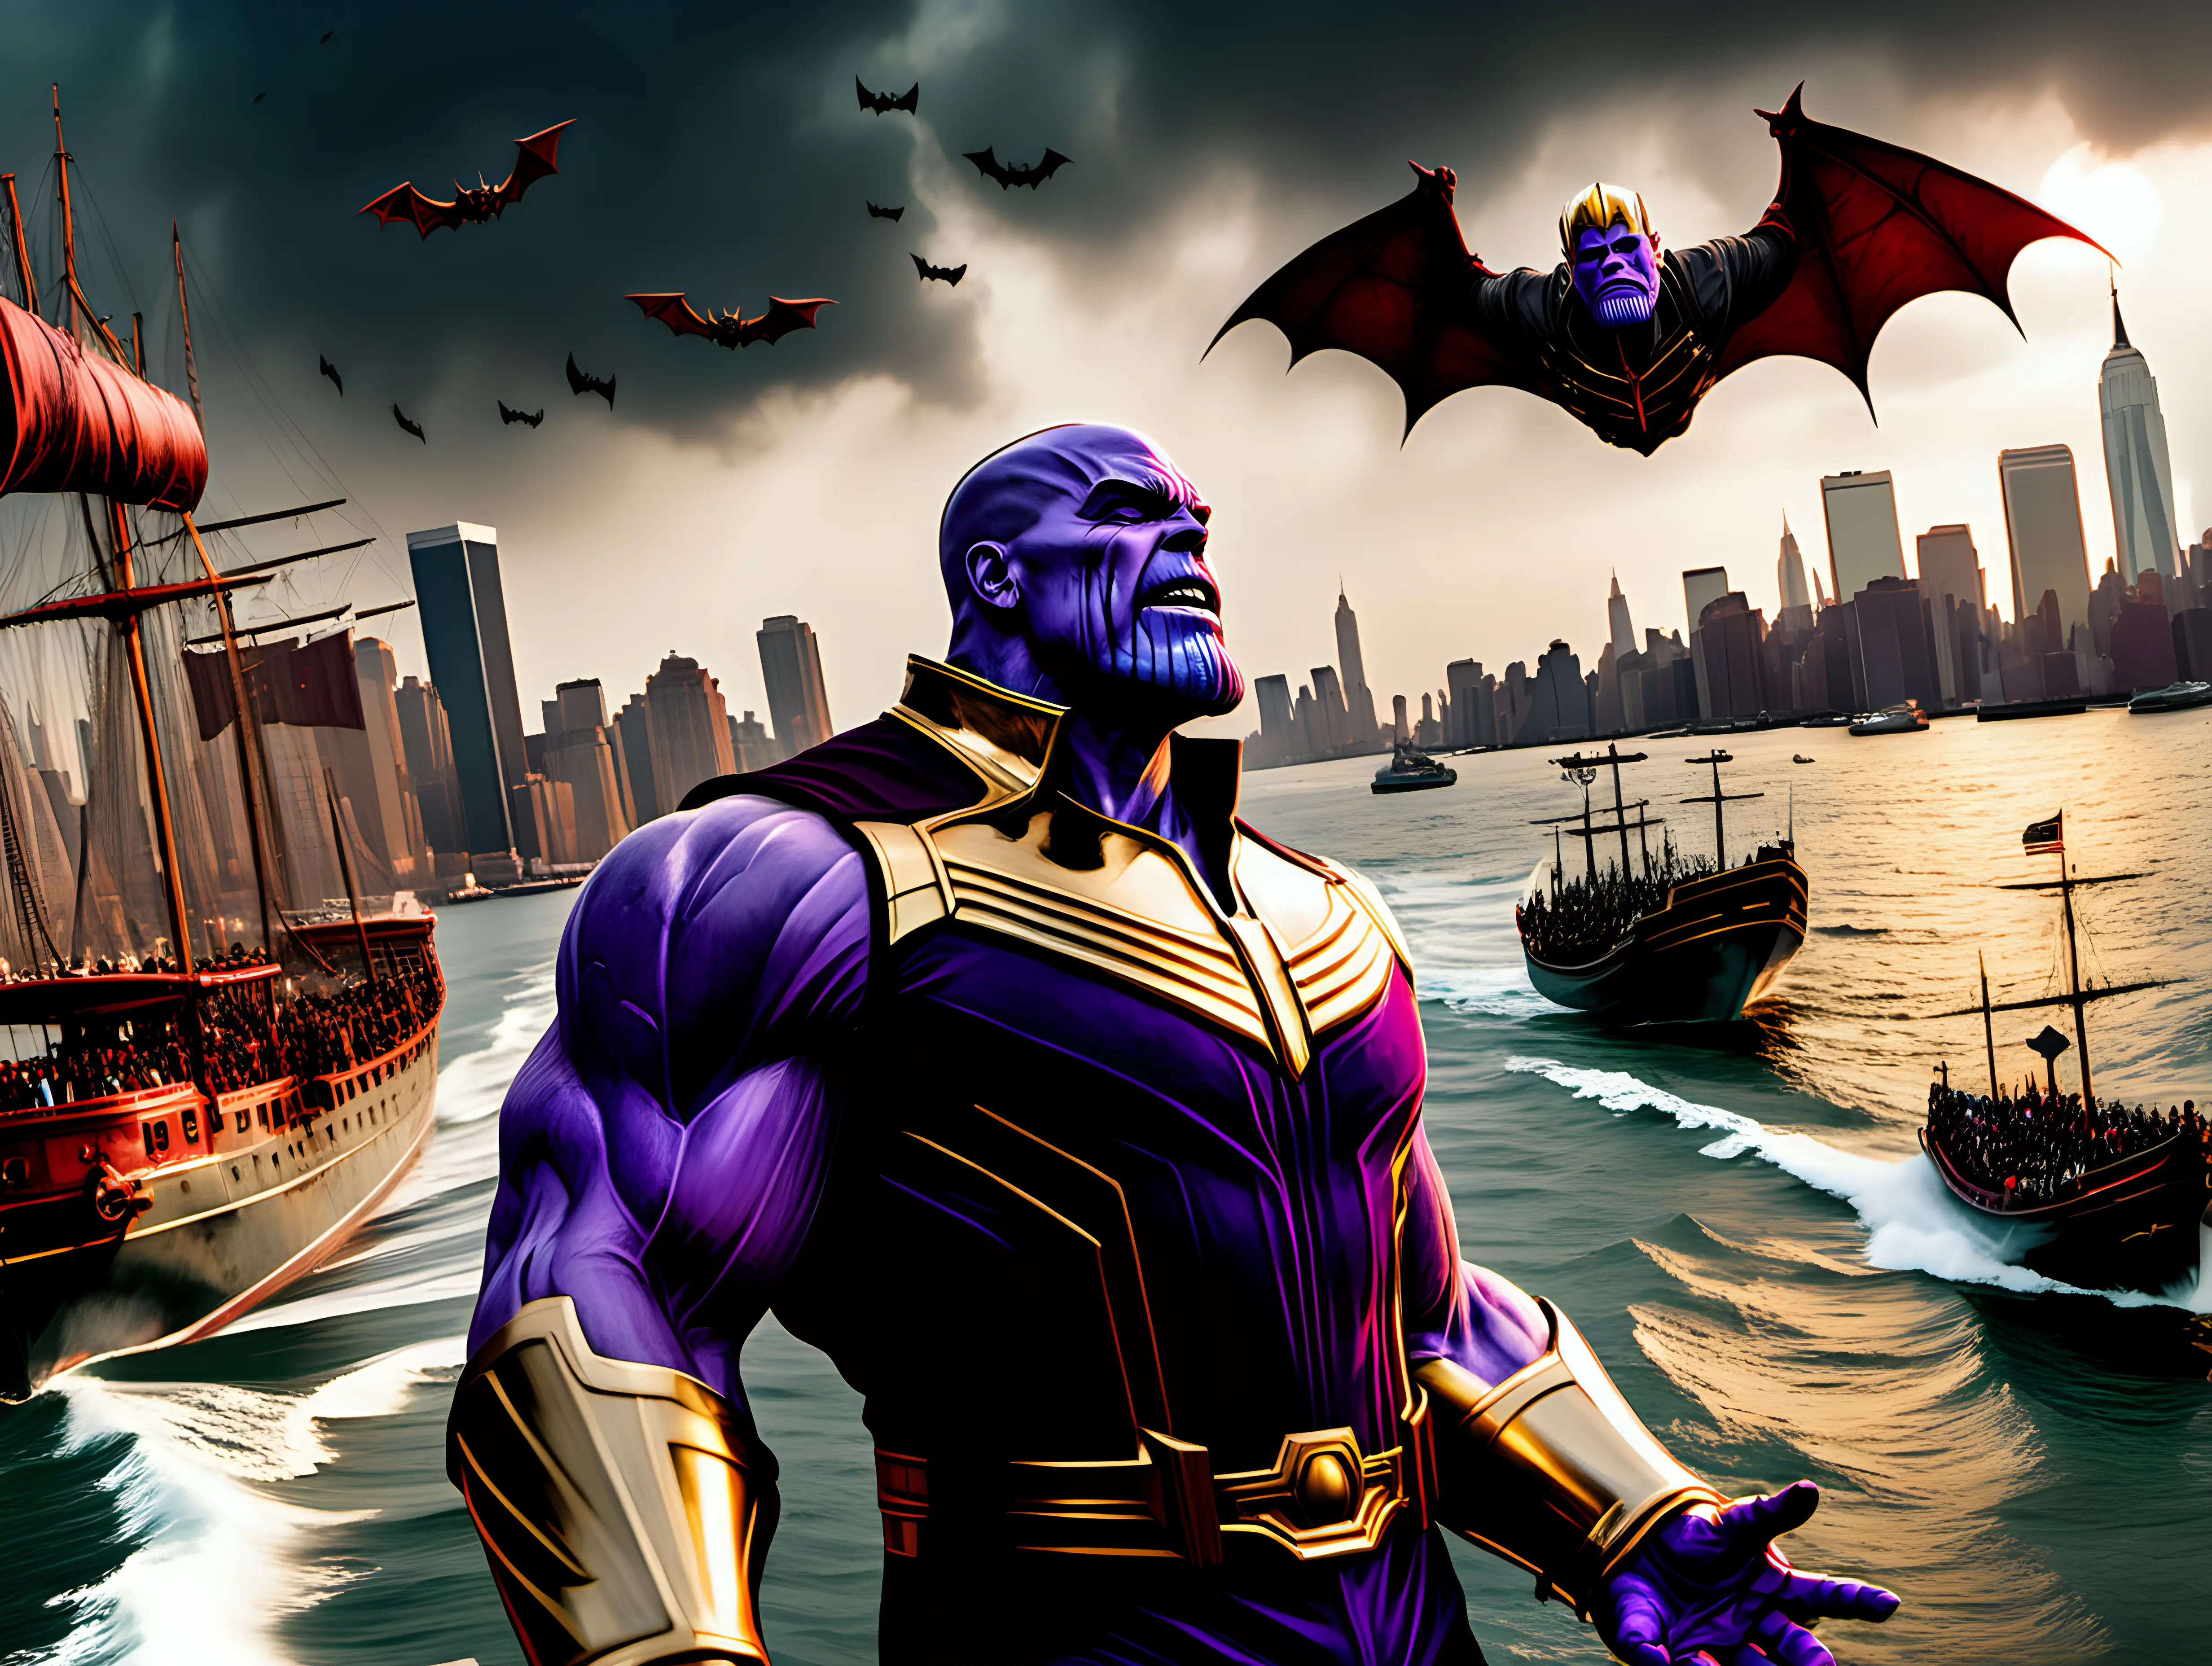 Menacing Thanos Emerges with Vampire Bats Over Historic NYC Ships